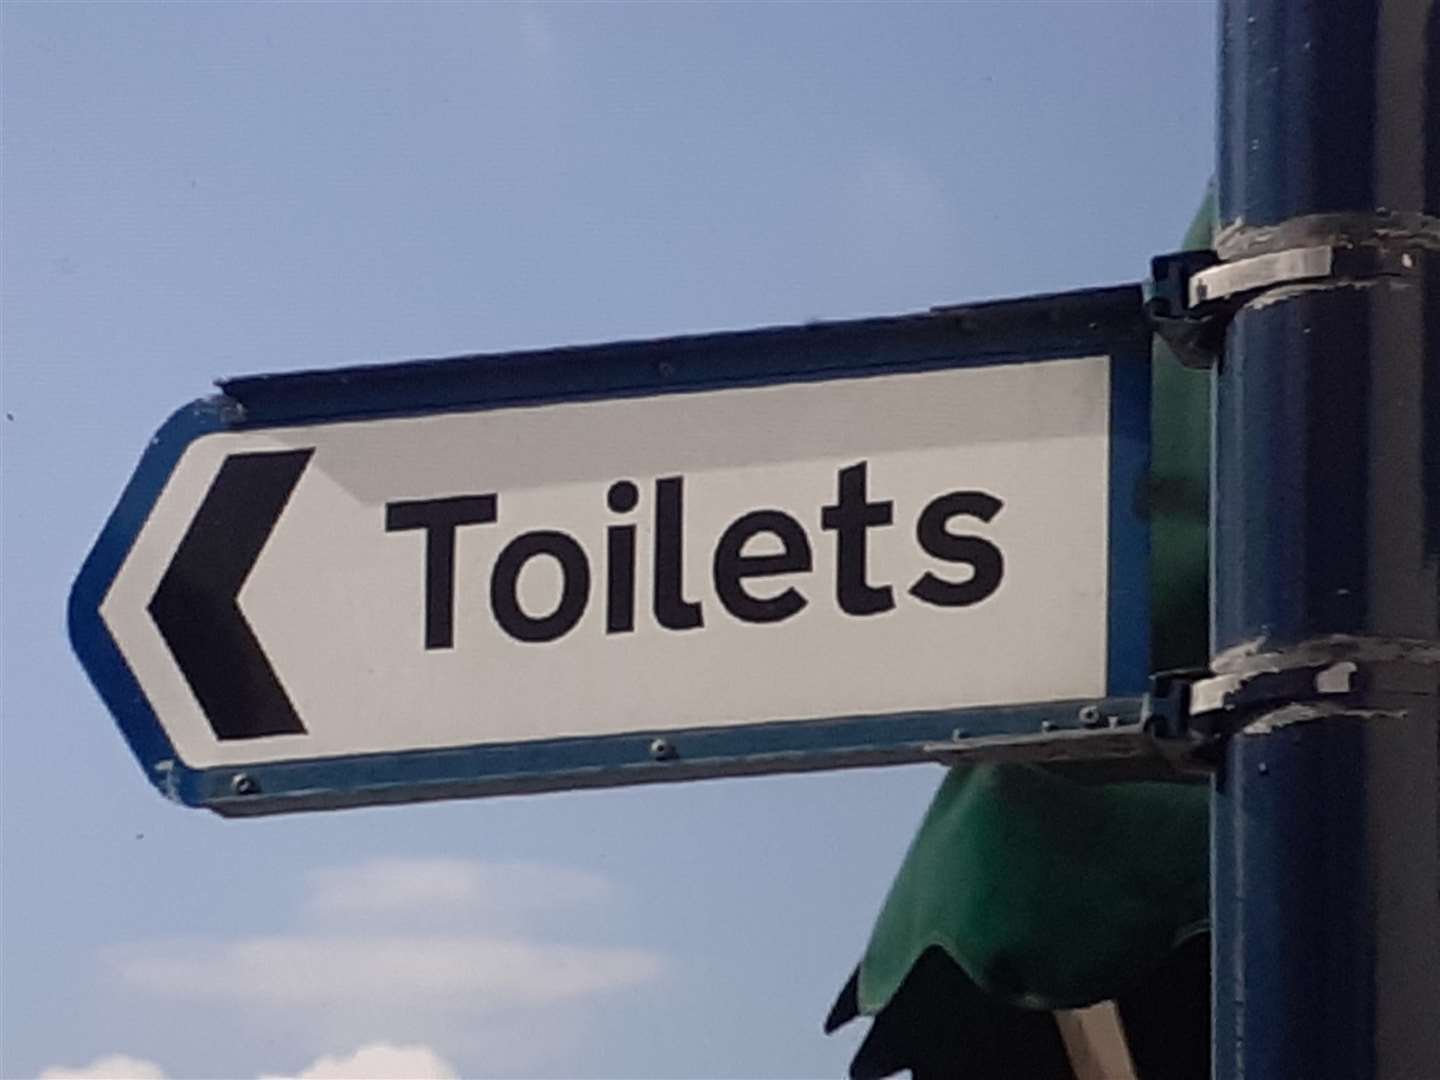 We take a look at what public toilets have reopned